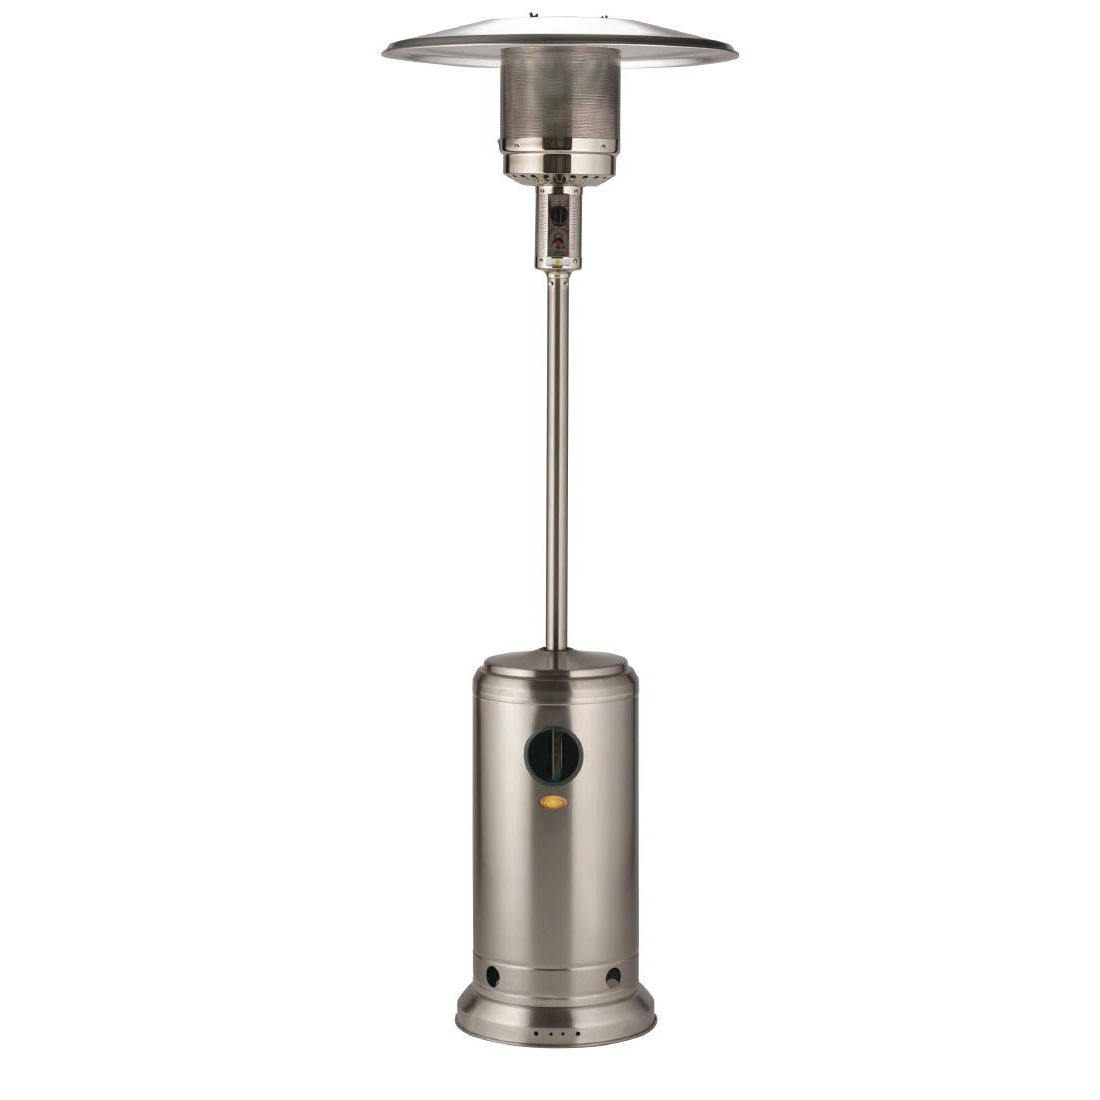 Lifestyle Edelweiss Stainless Steel Patio Heater 13kW